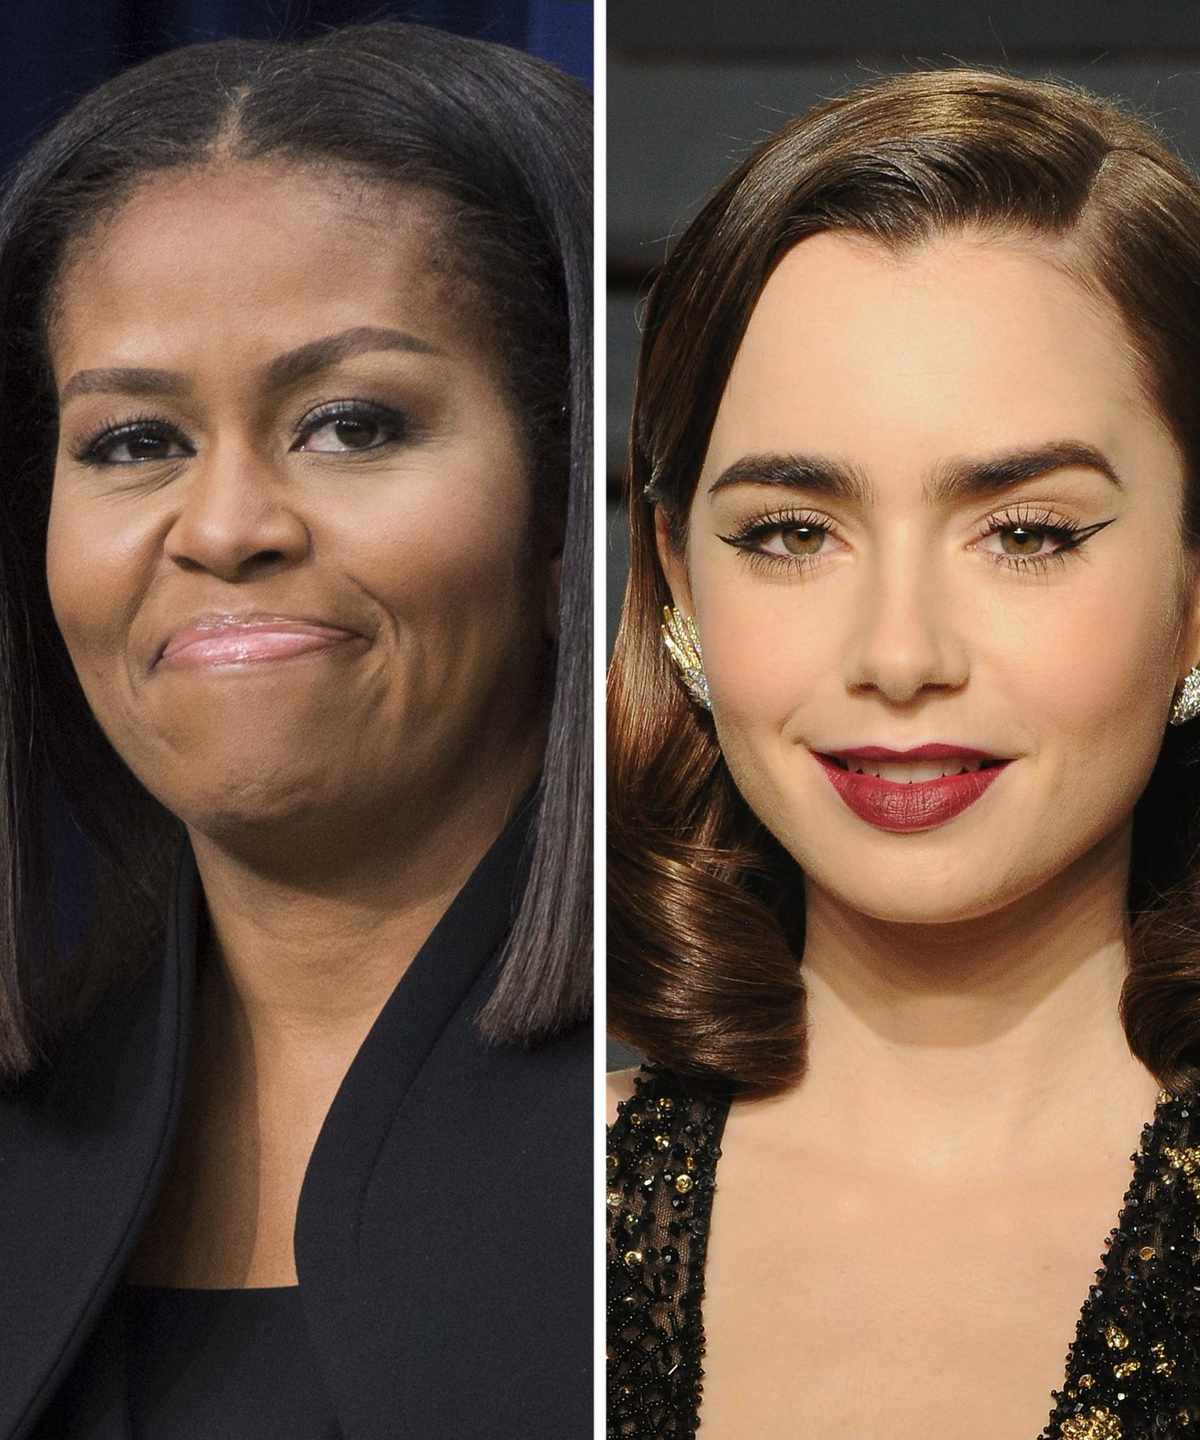 Michelle Obama and Lily Collins